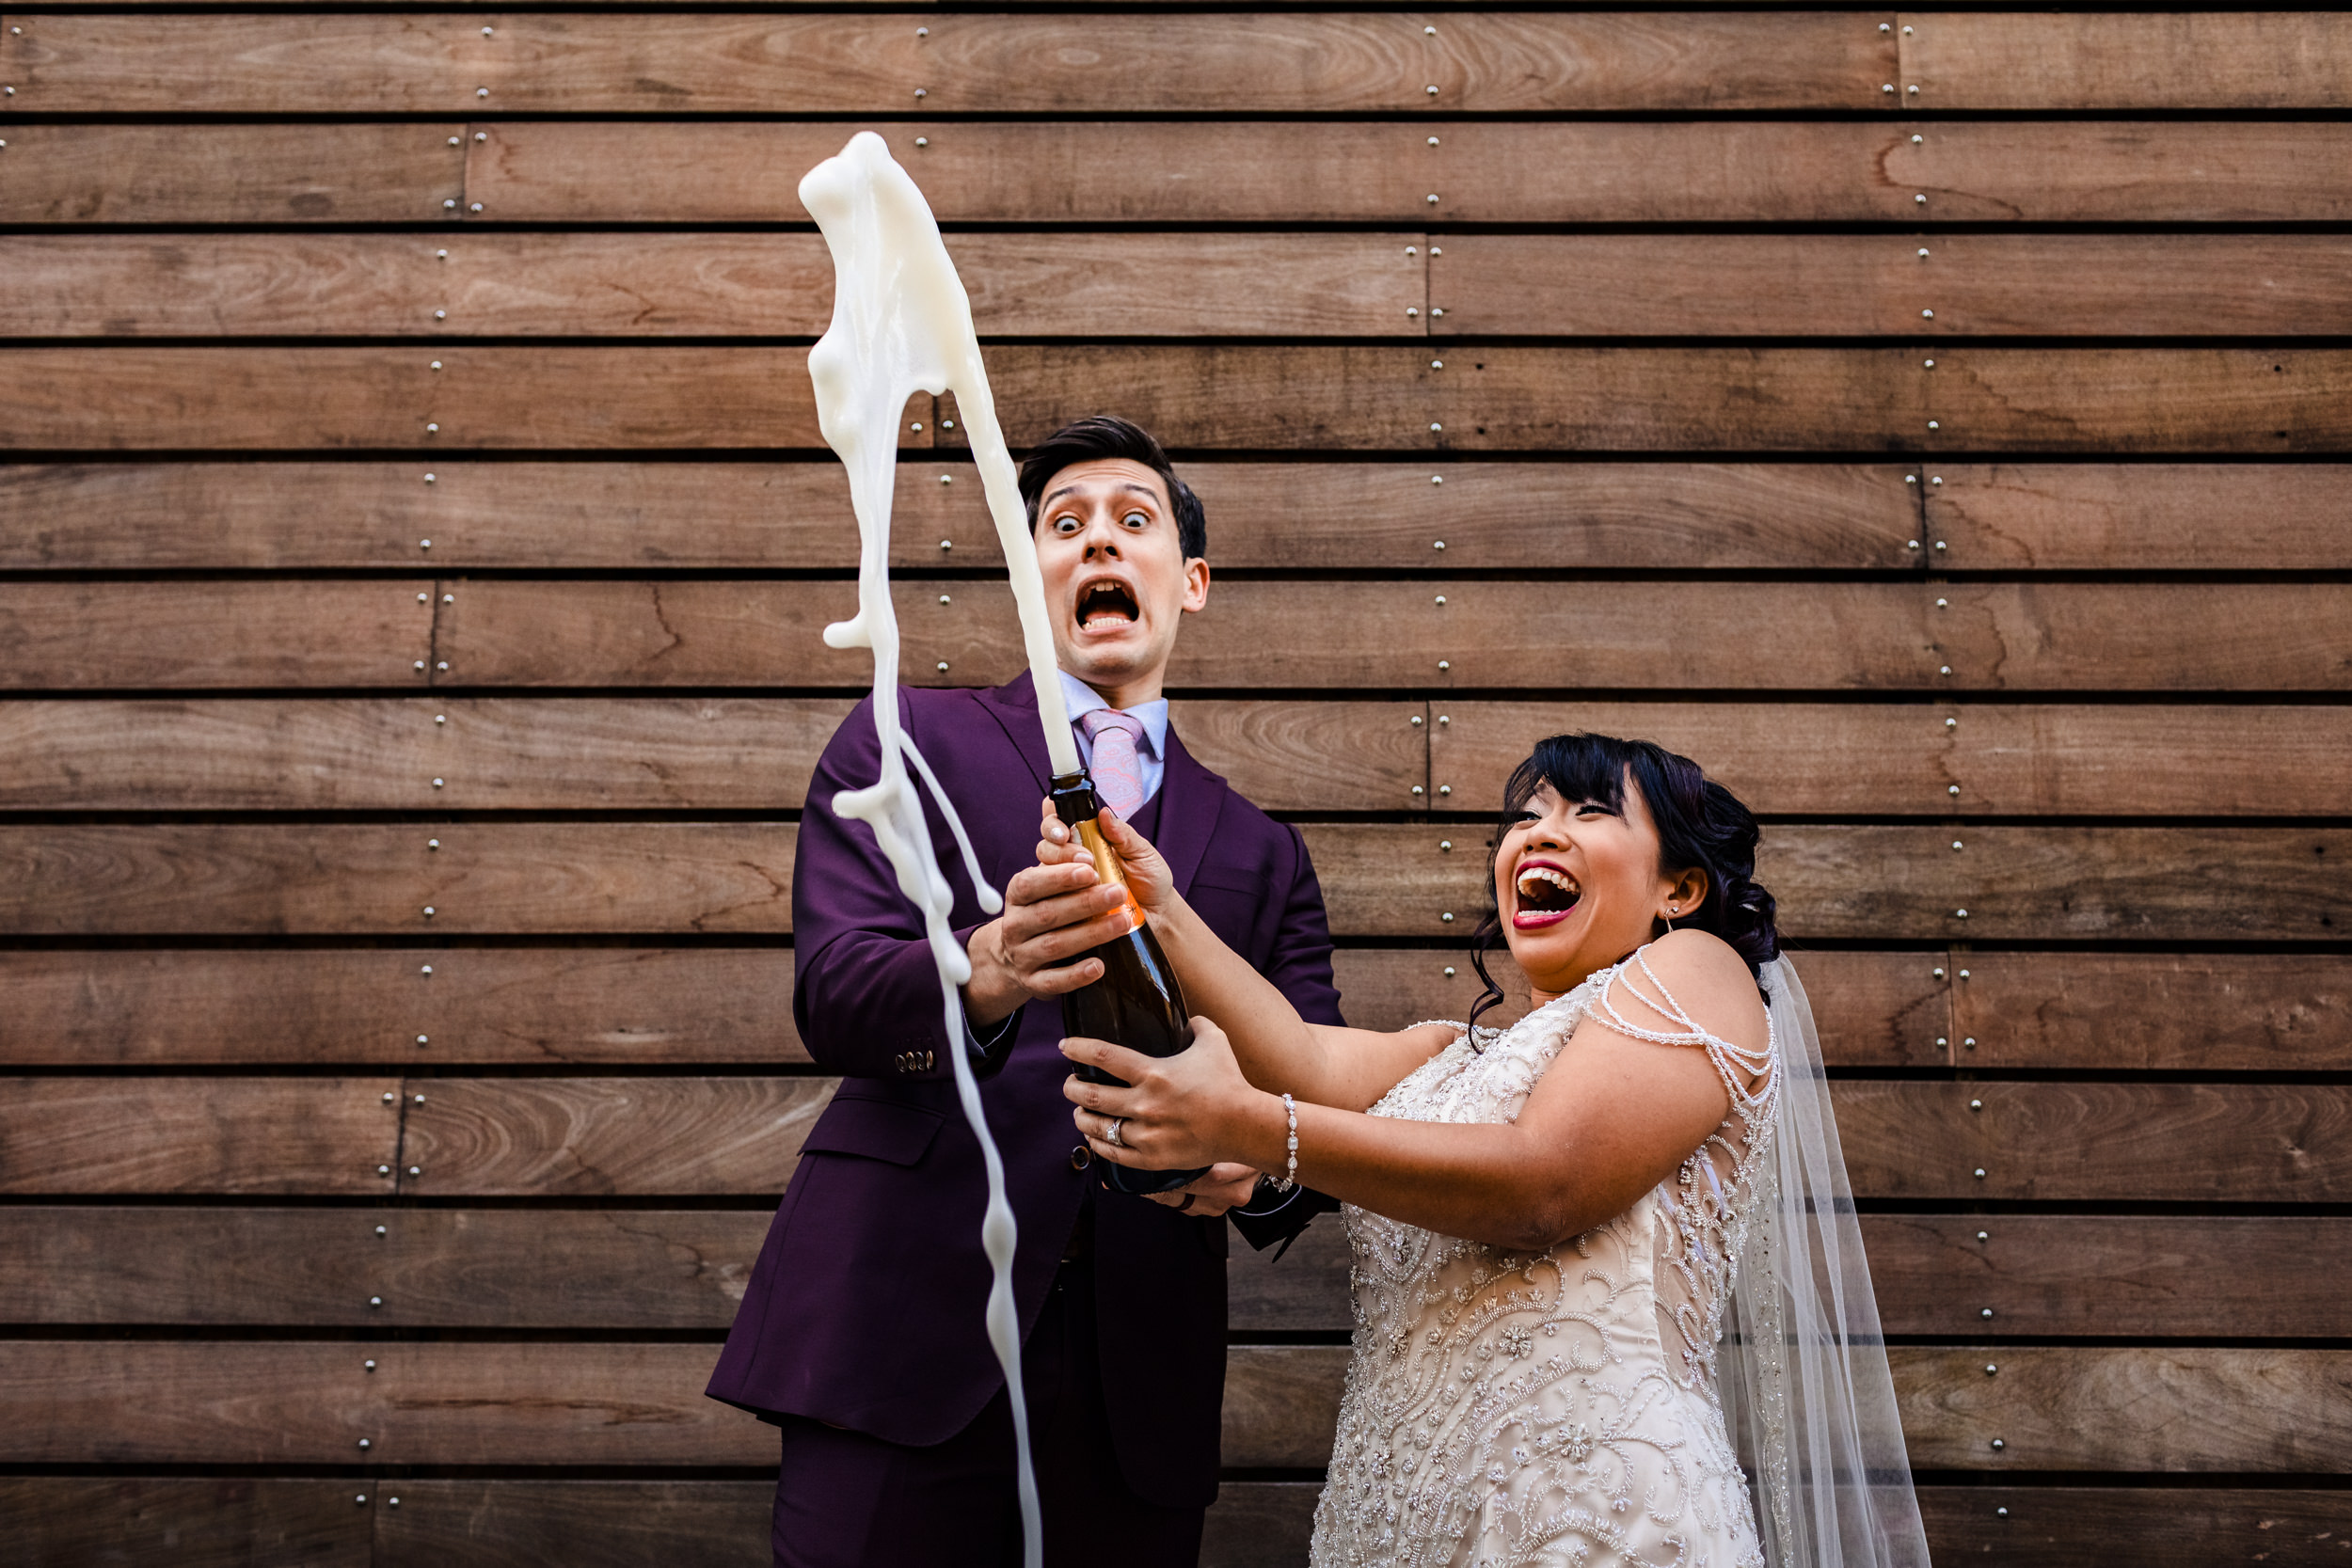 A couple reacts to popping a bottle of champagne during a wedding at the Joinery in Chicago.